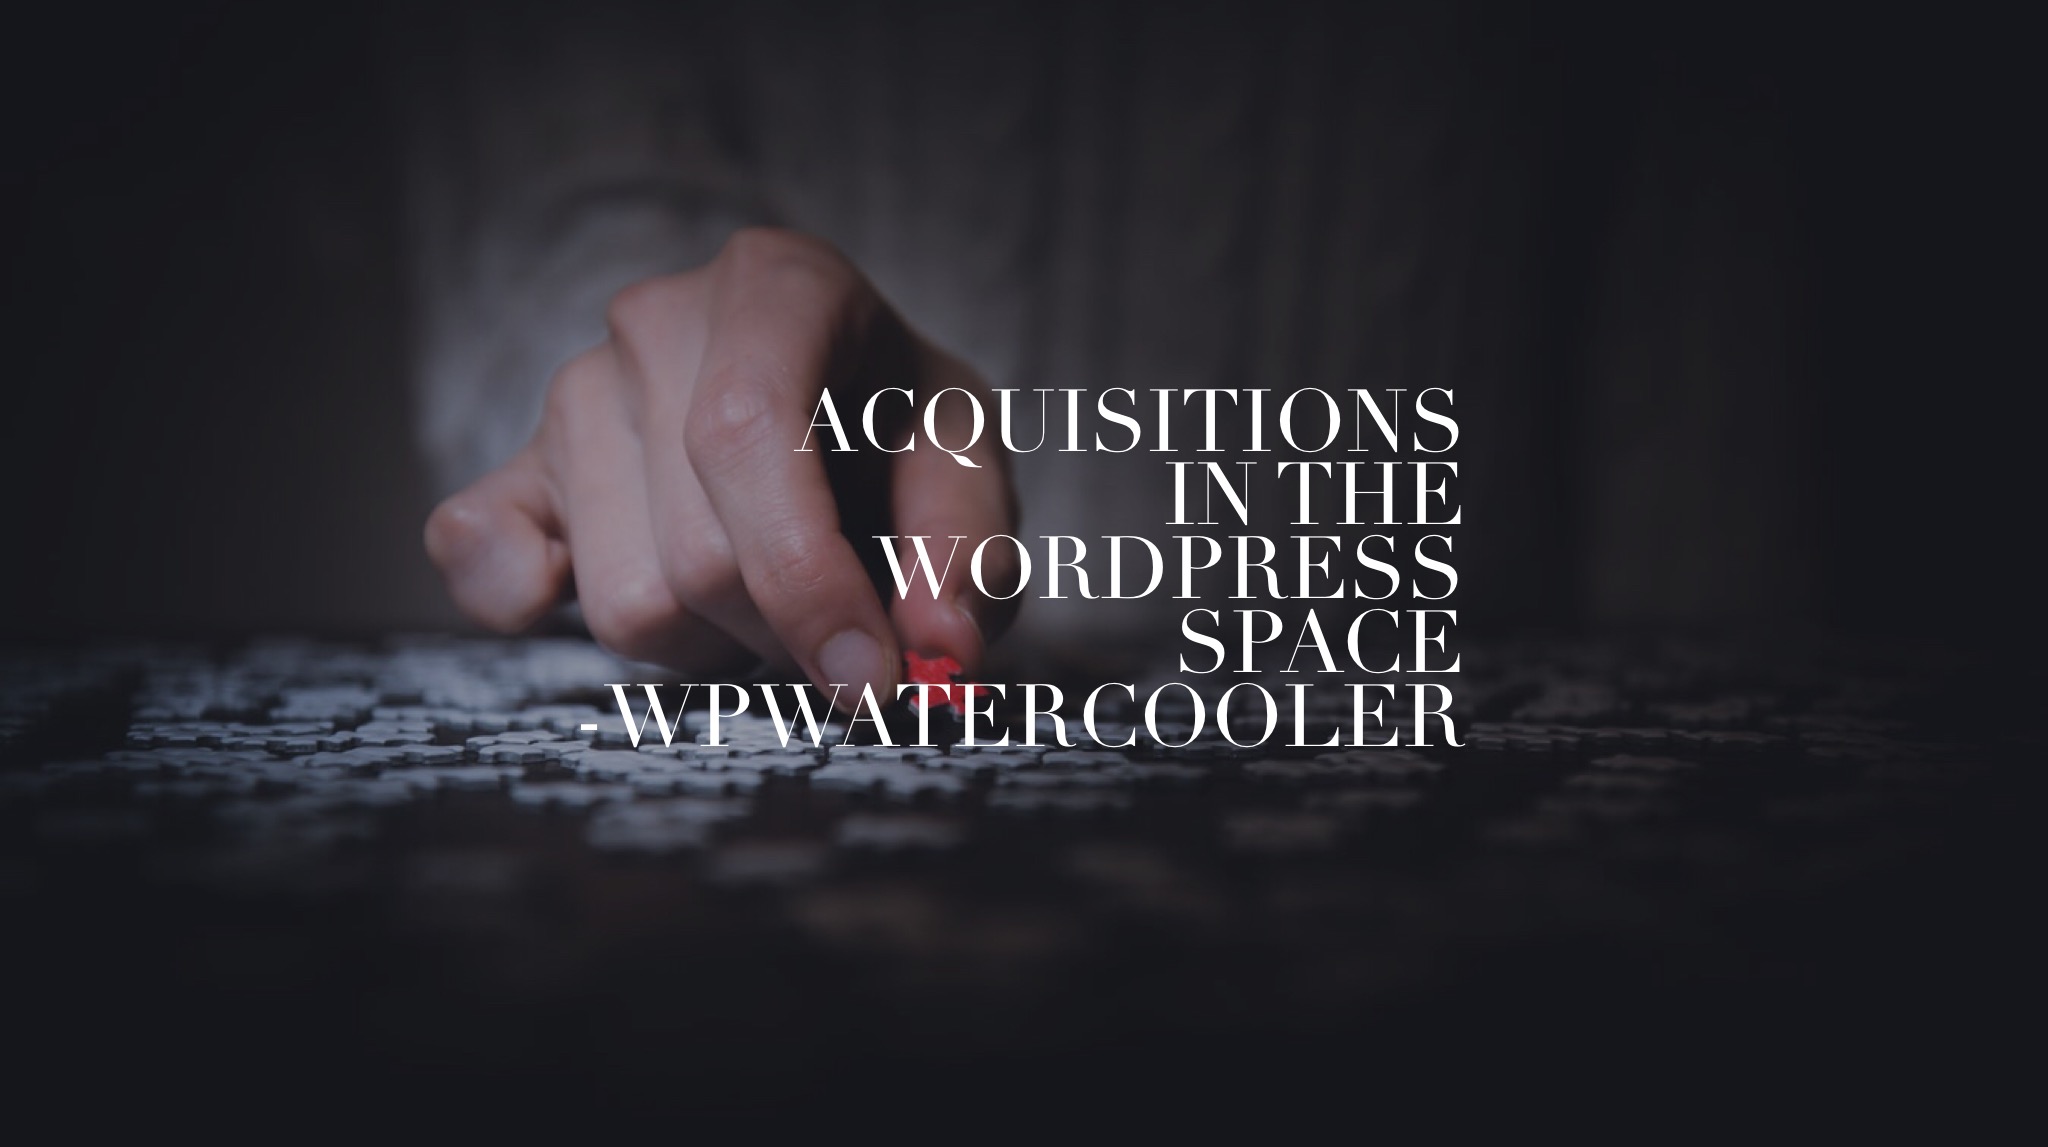 EP280 – Acquisitions in the WordPress space